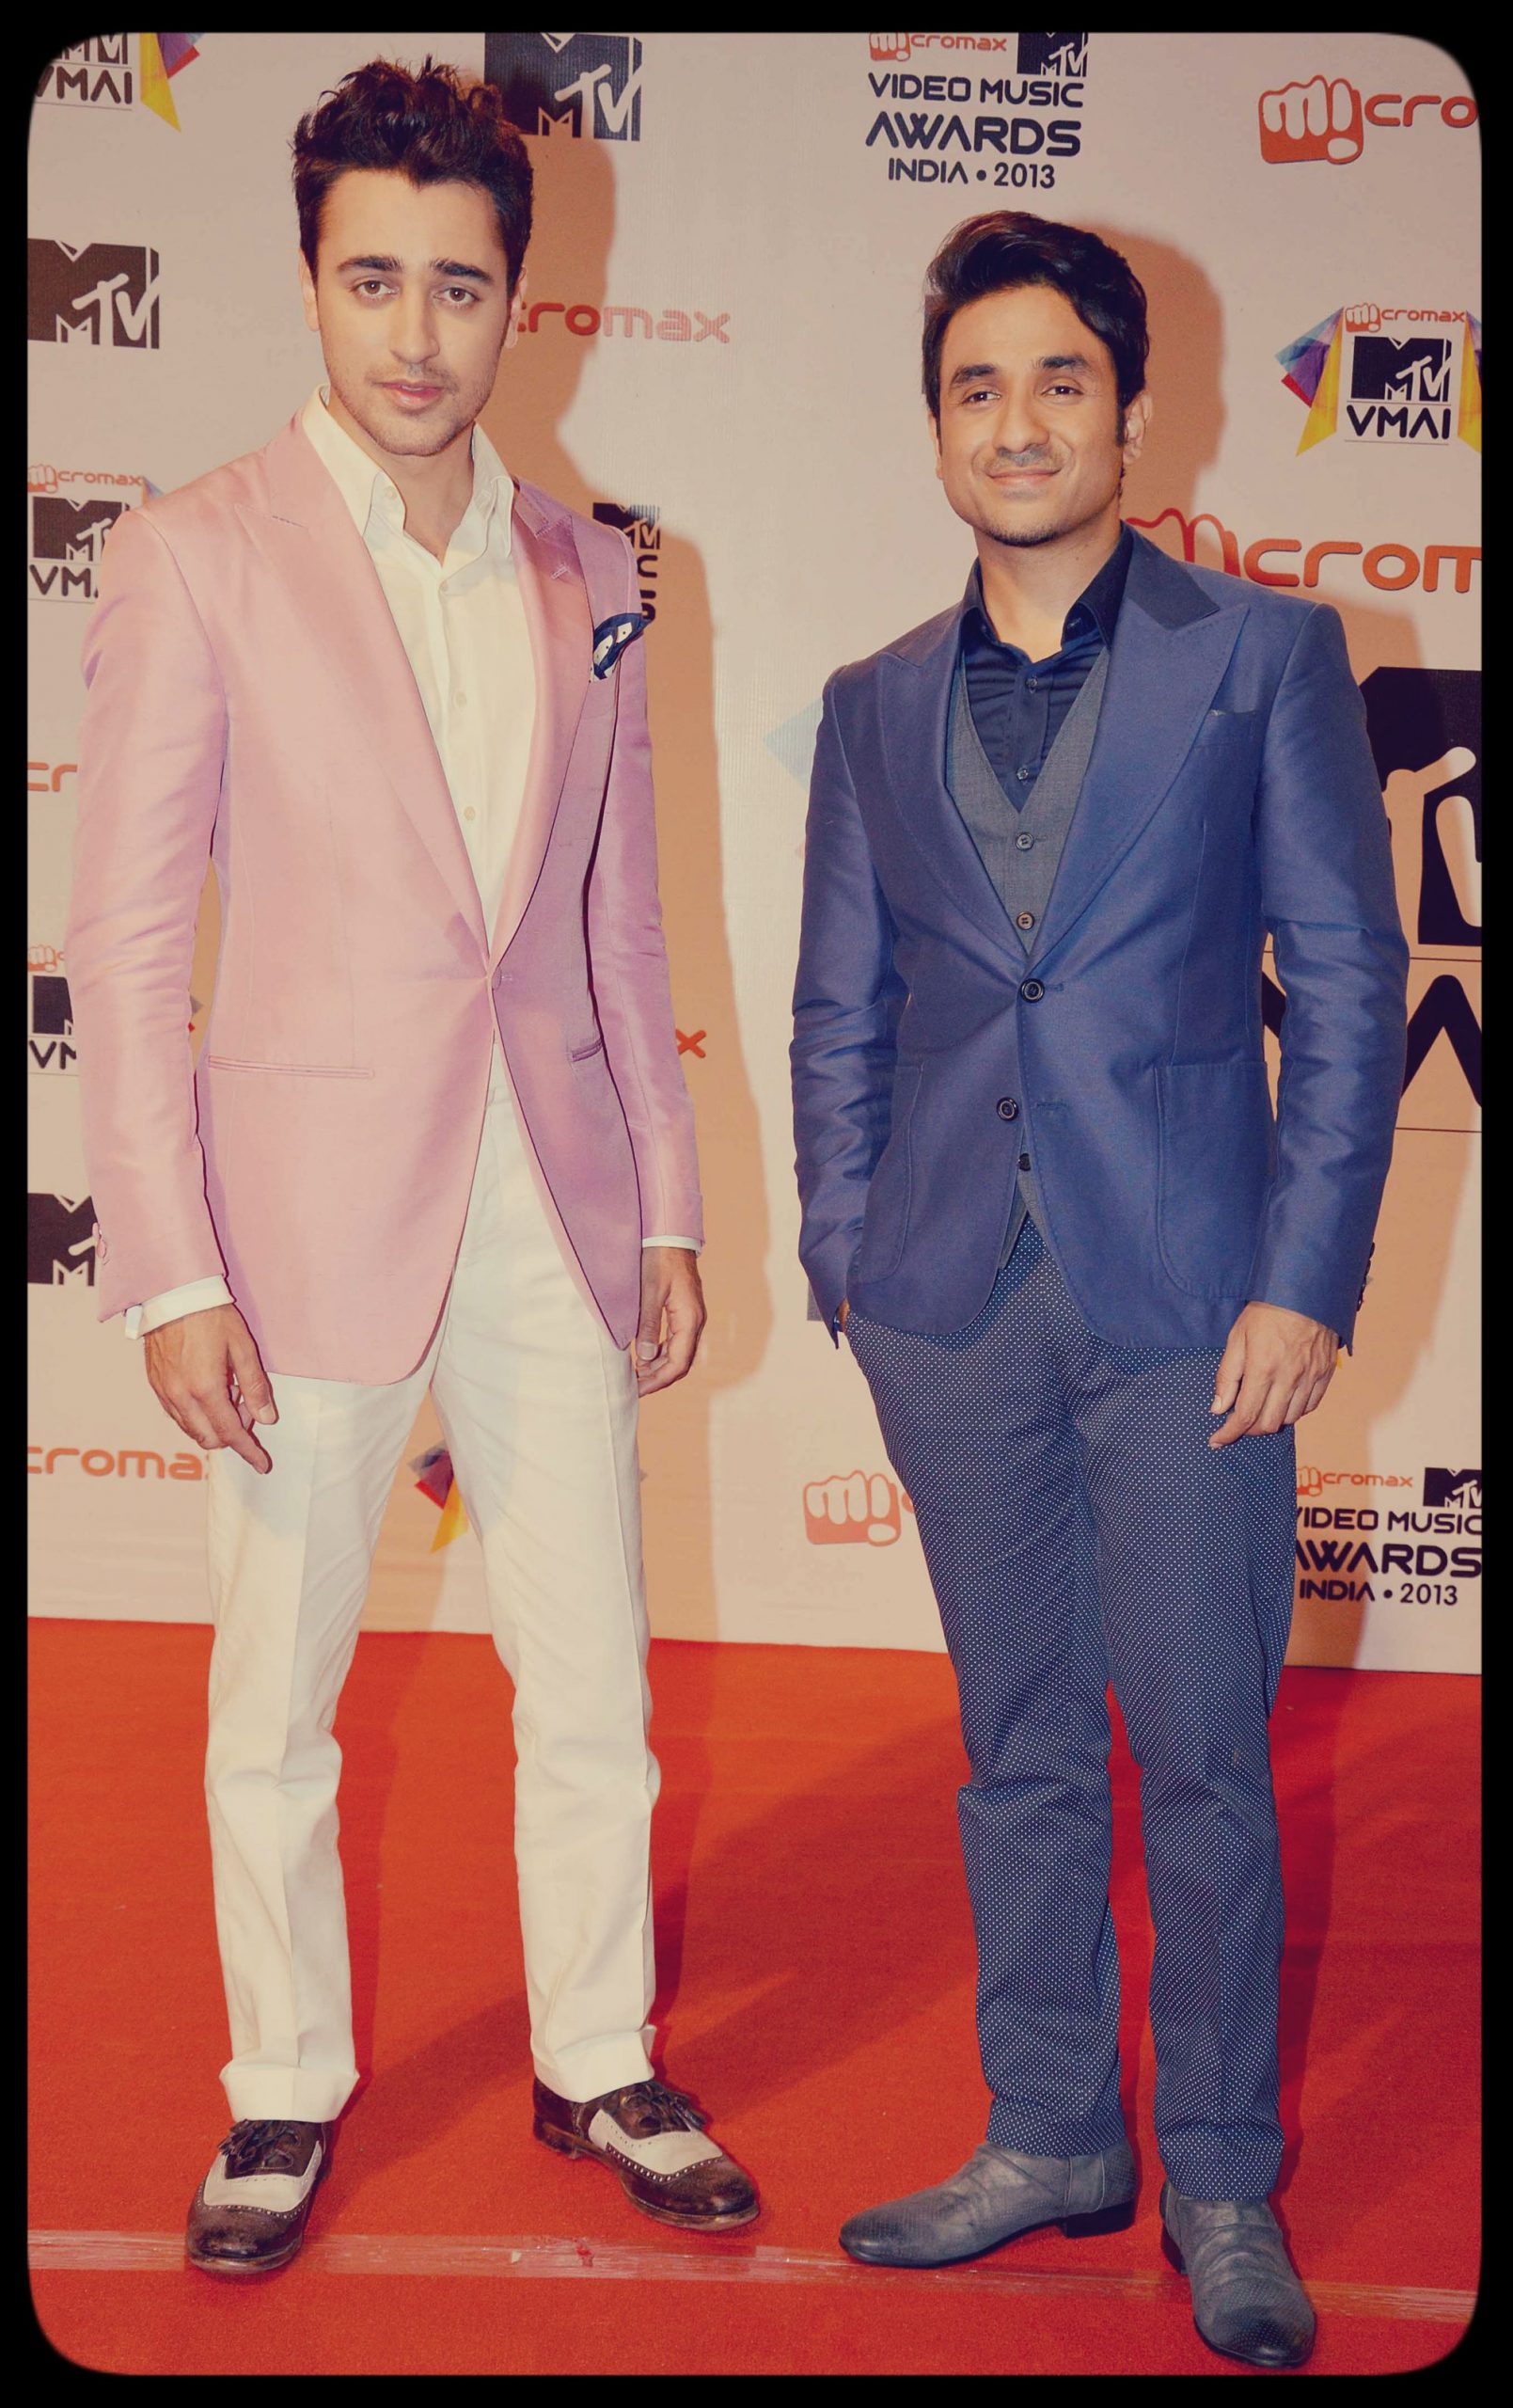 Imran Khan and Vir Das at the 2013 MTV Video Music Awards India on March 21, 2013 (Photo courtesy | Yogen Shah)